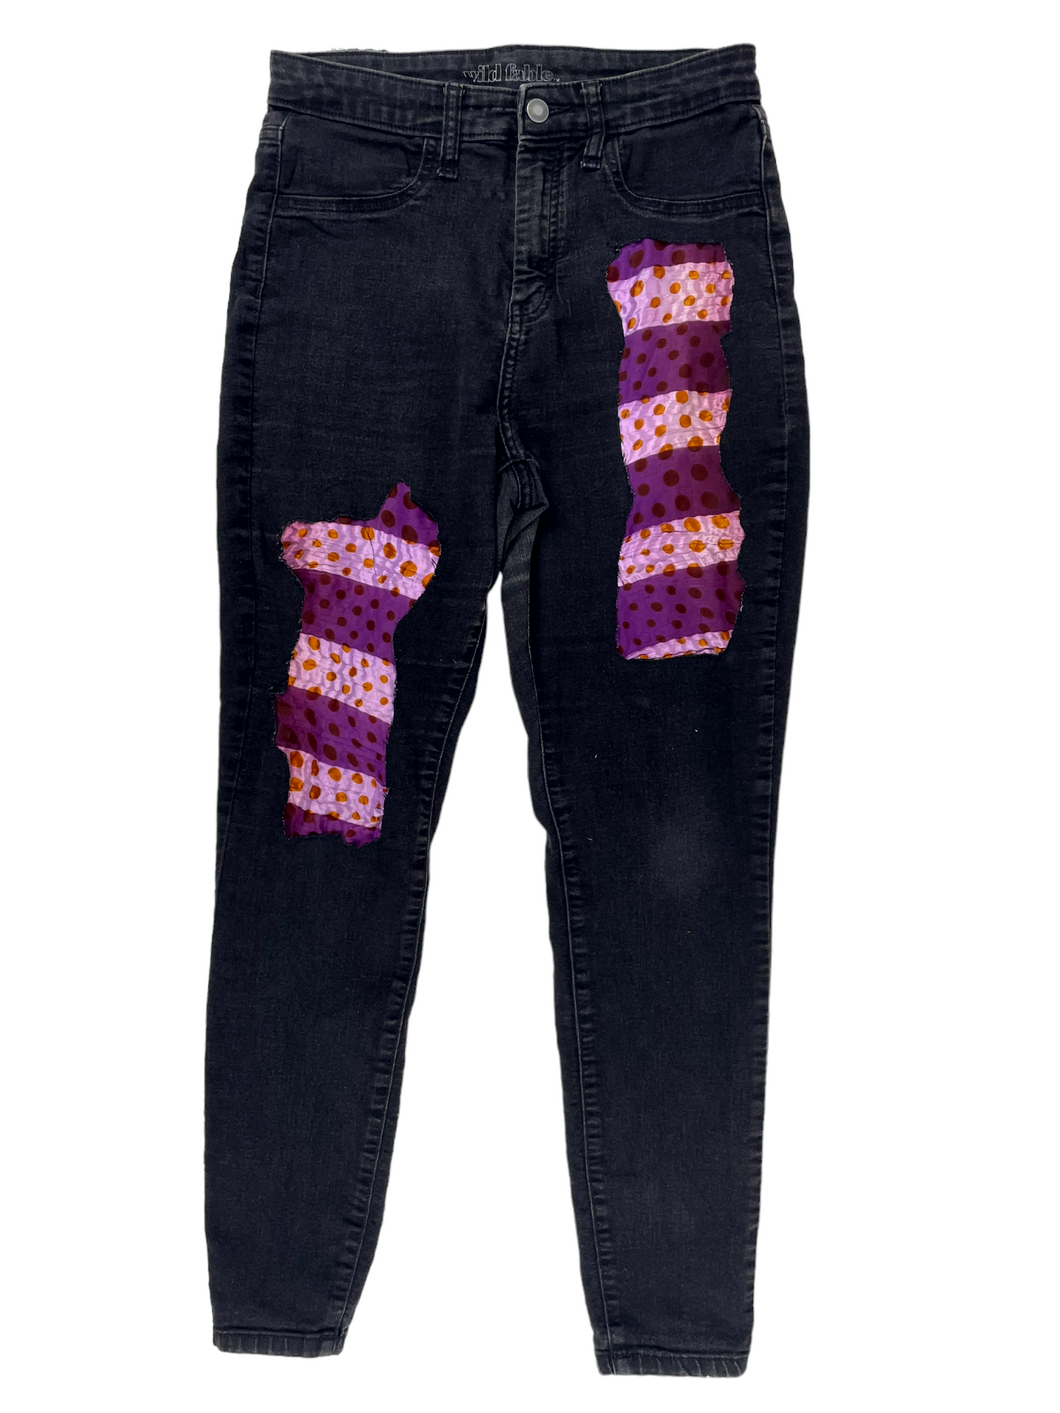 Patched Jeans Black - 29R